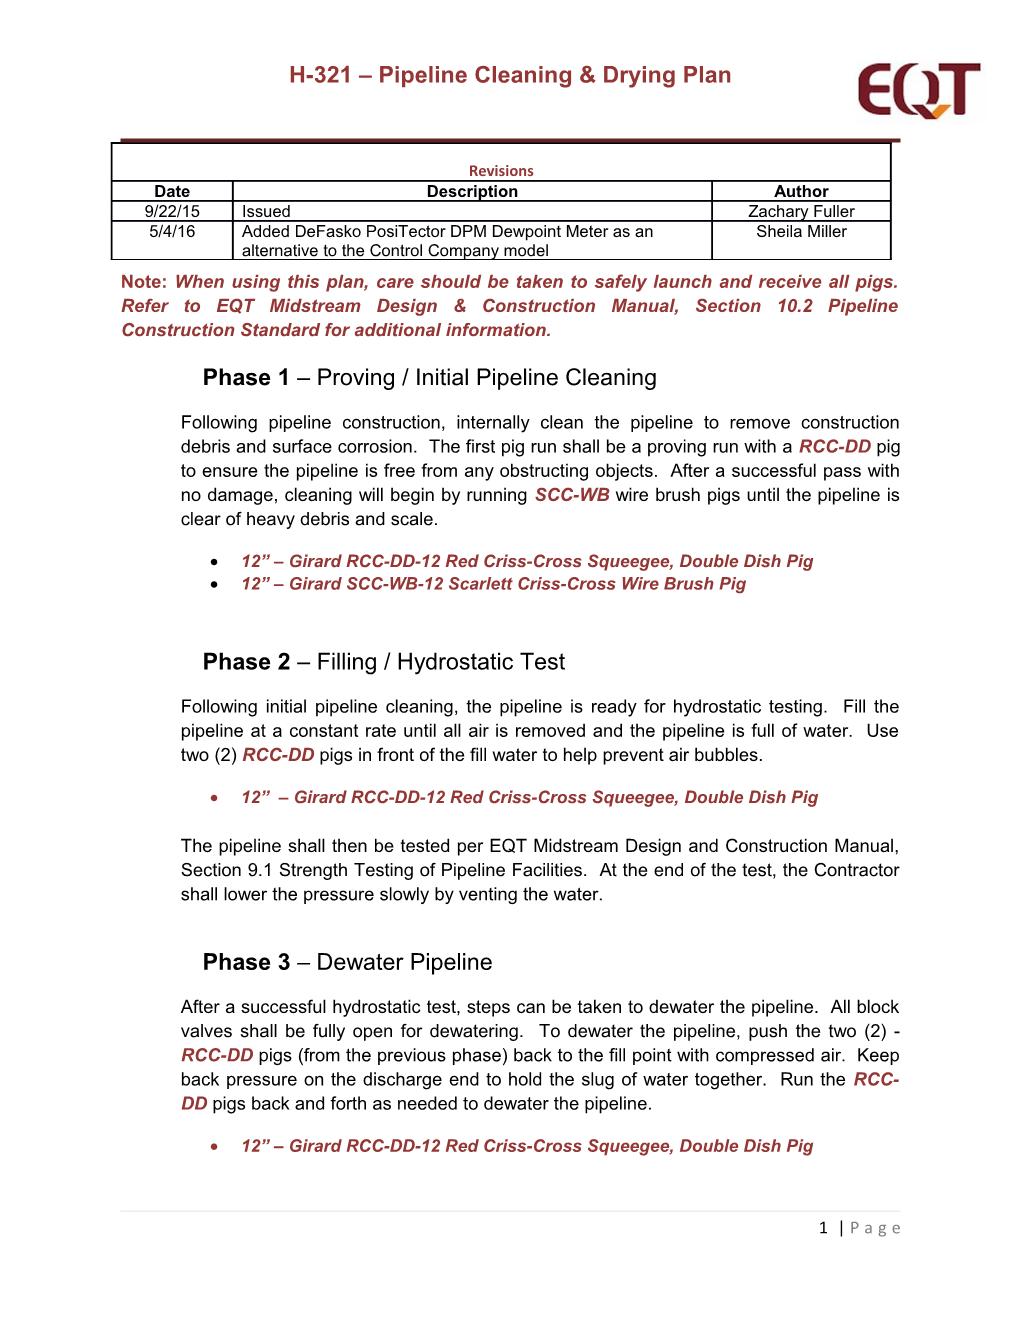 H-321 Pipeline Cleaning & Drying Plan